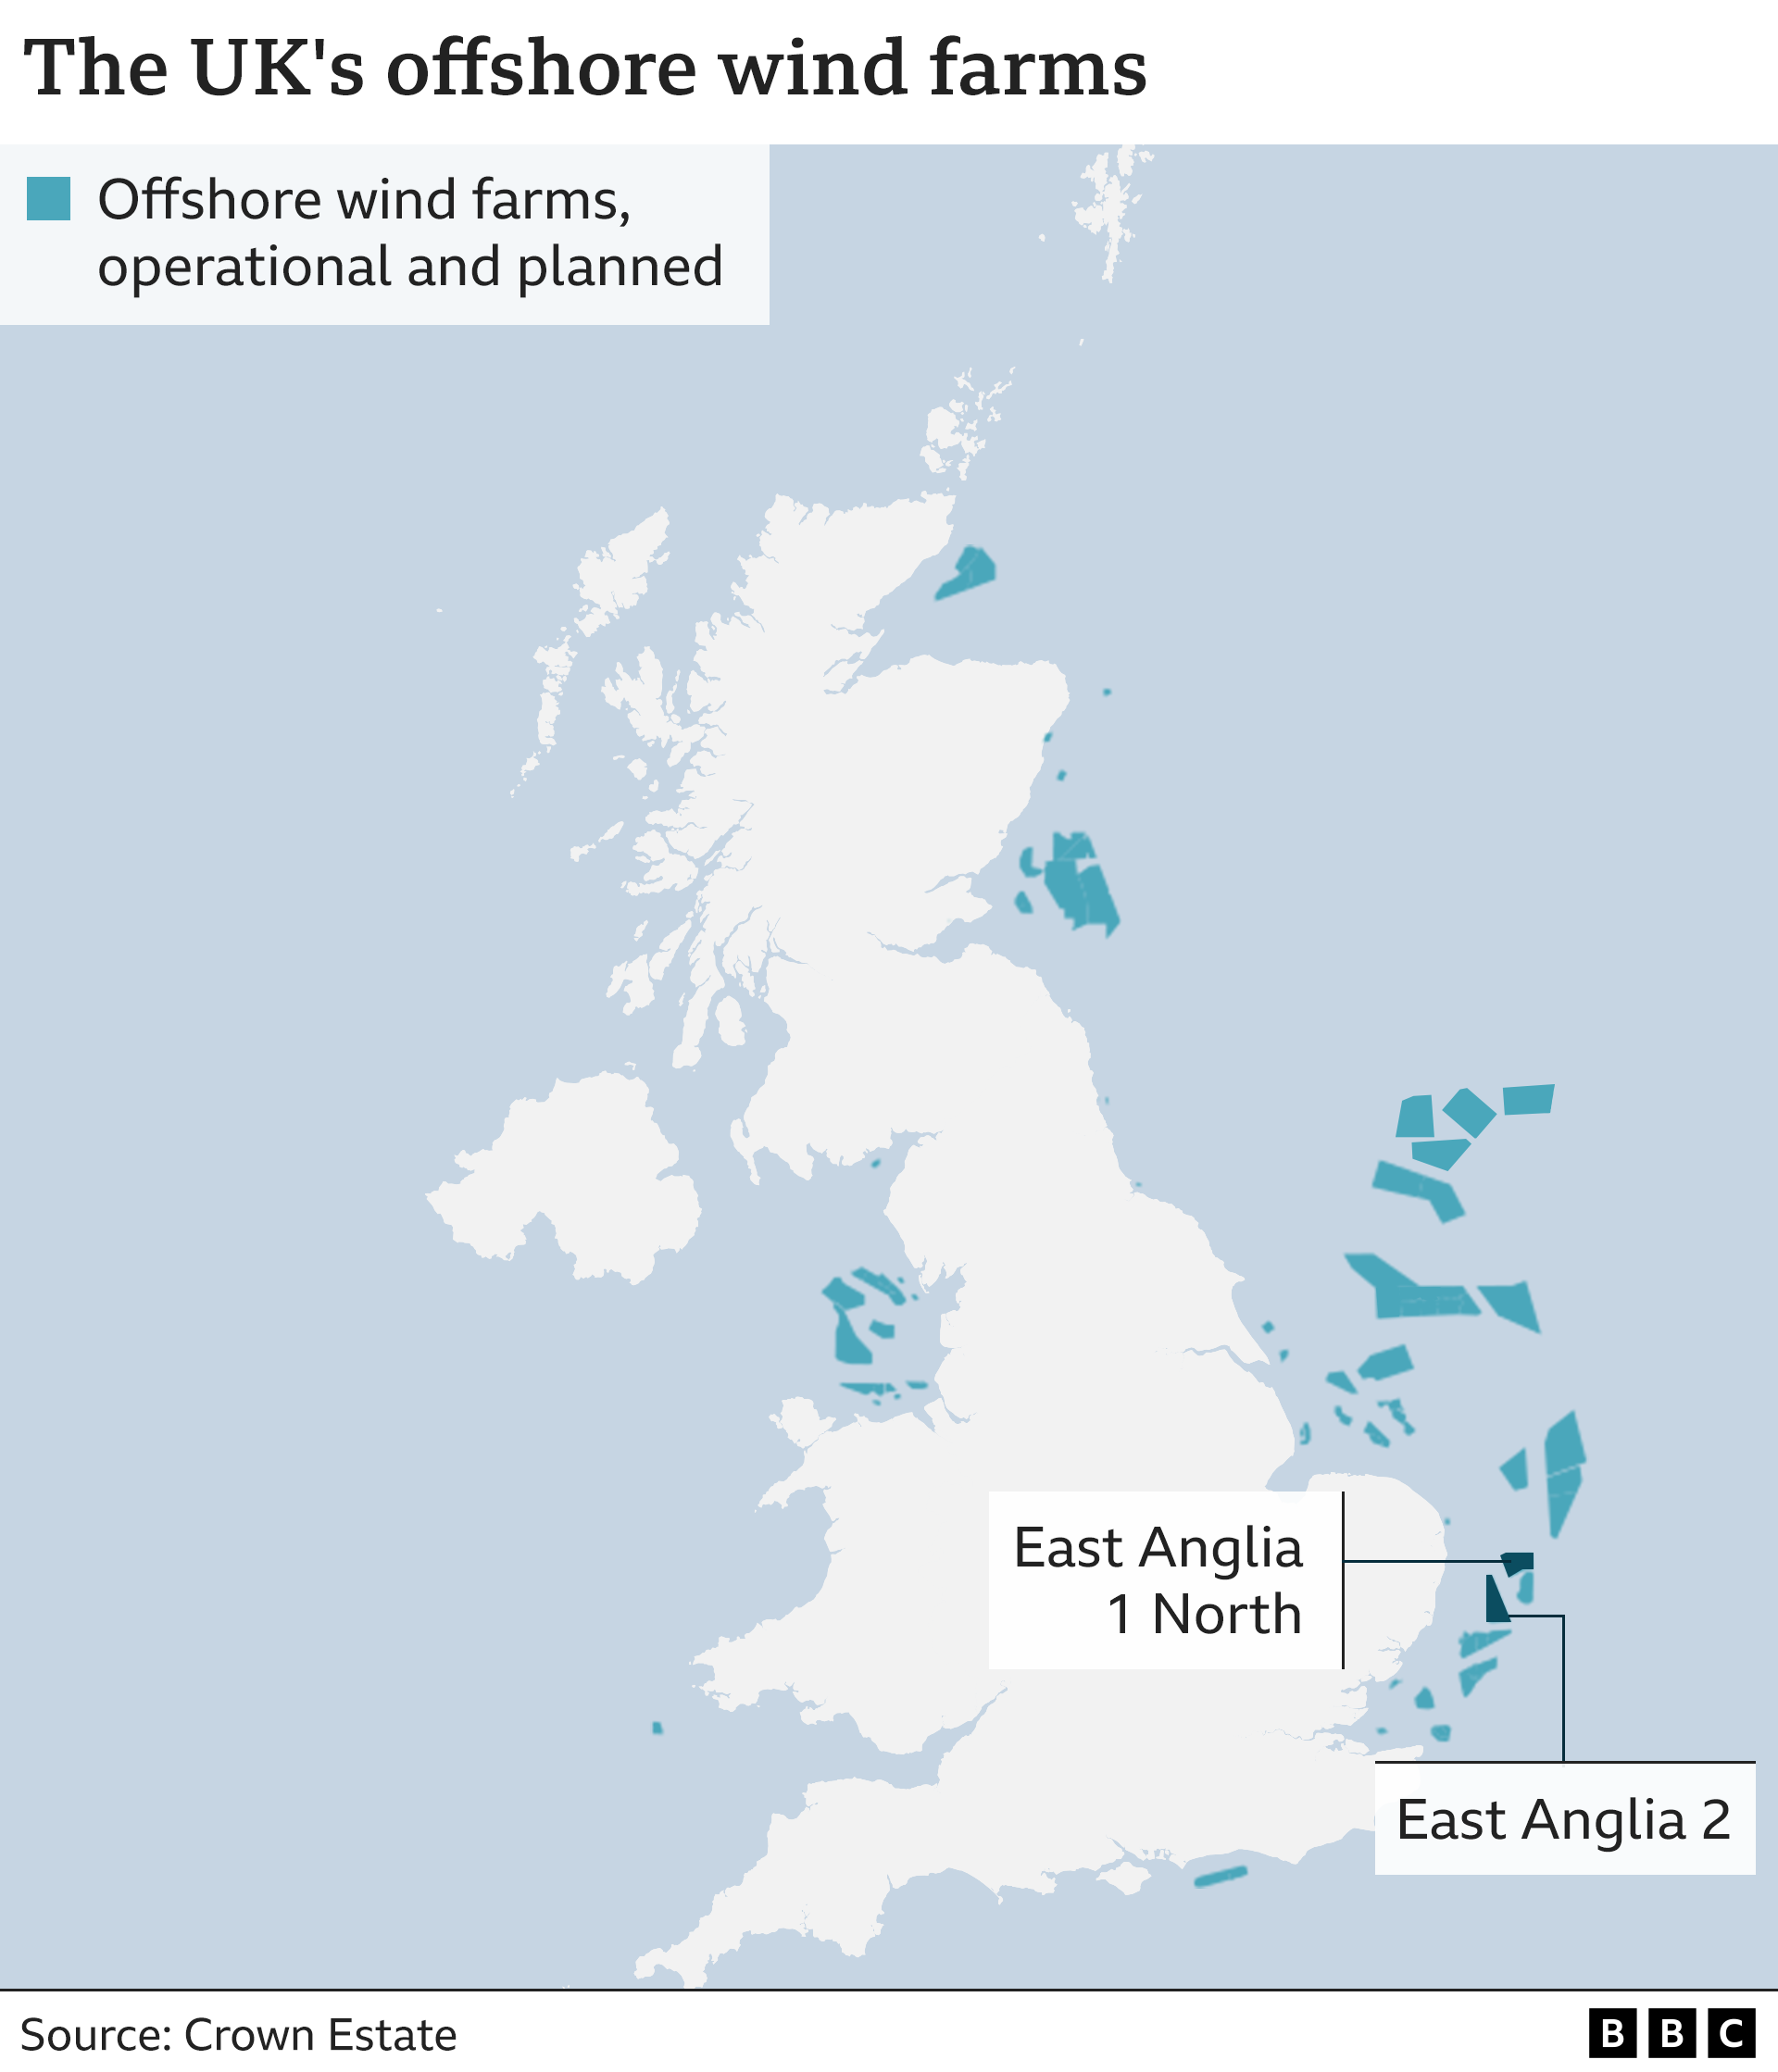 A graphic showing offshore wind farms in the UK